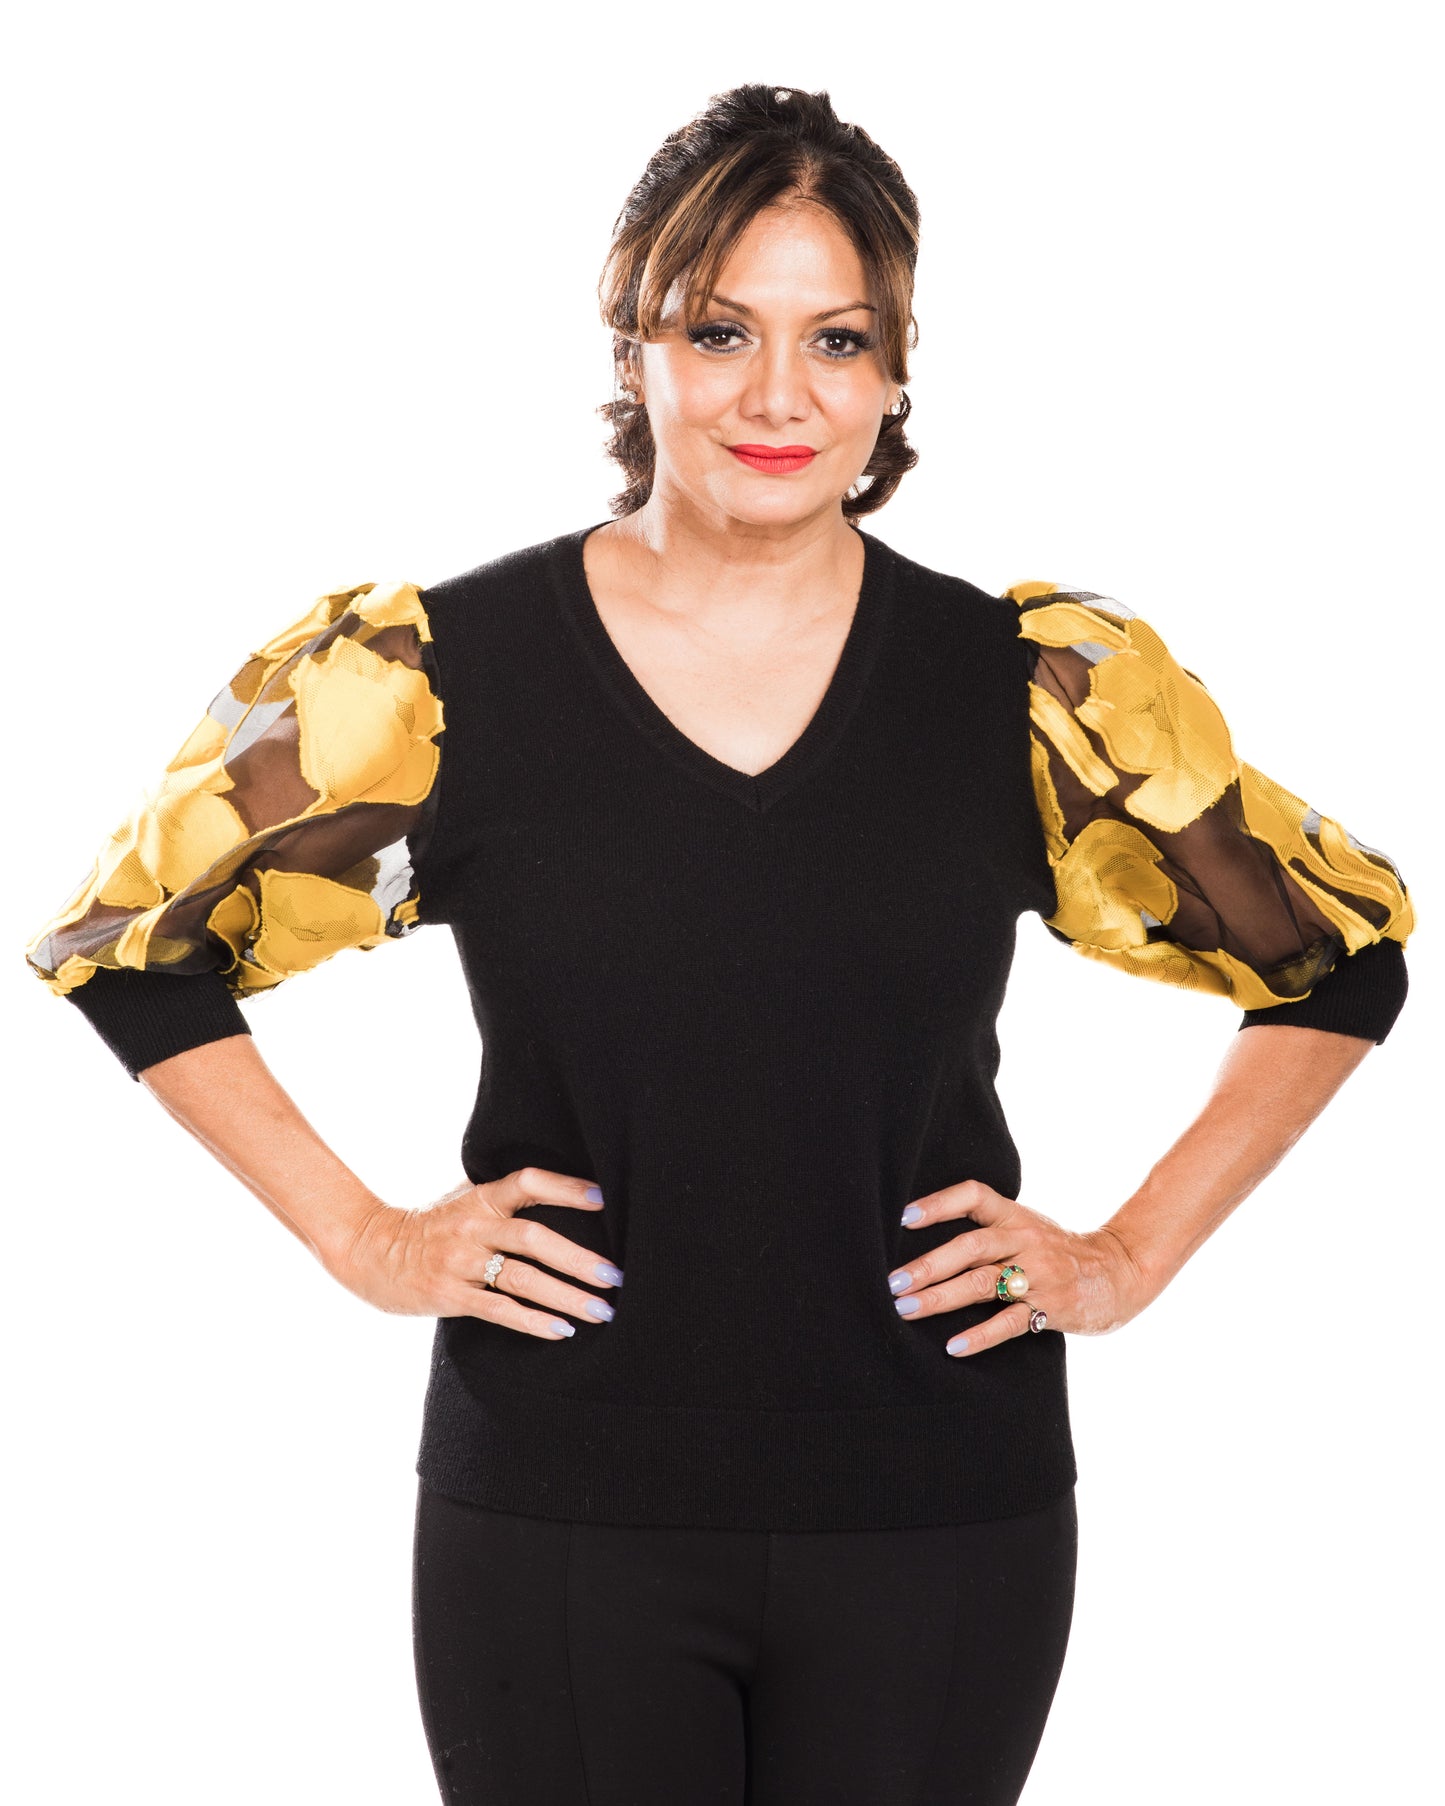 MEDIUM BLACK V-NECK CASHMERE SWEATER WITH 3/4 PUFF SLEEVE OF YELLOW DAMASK AFRICAN POPPIES ON BLACK SILK ORGANZA